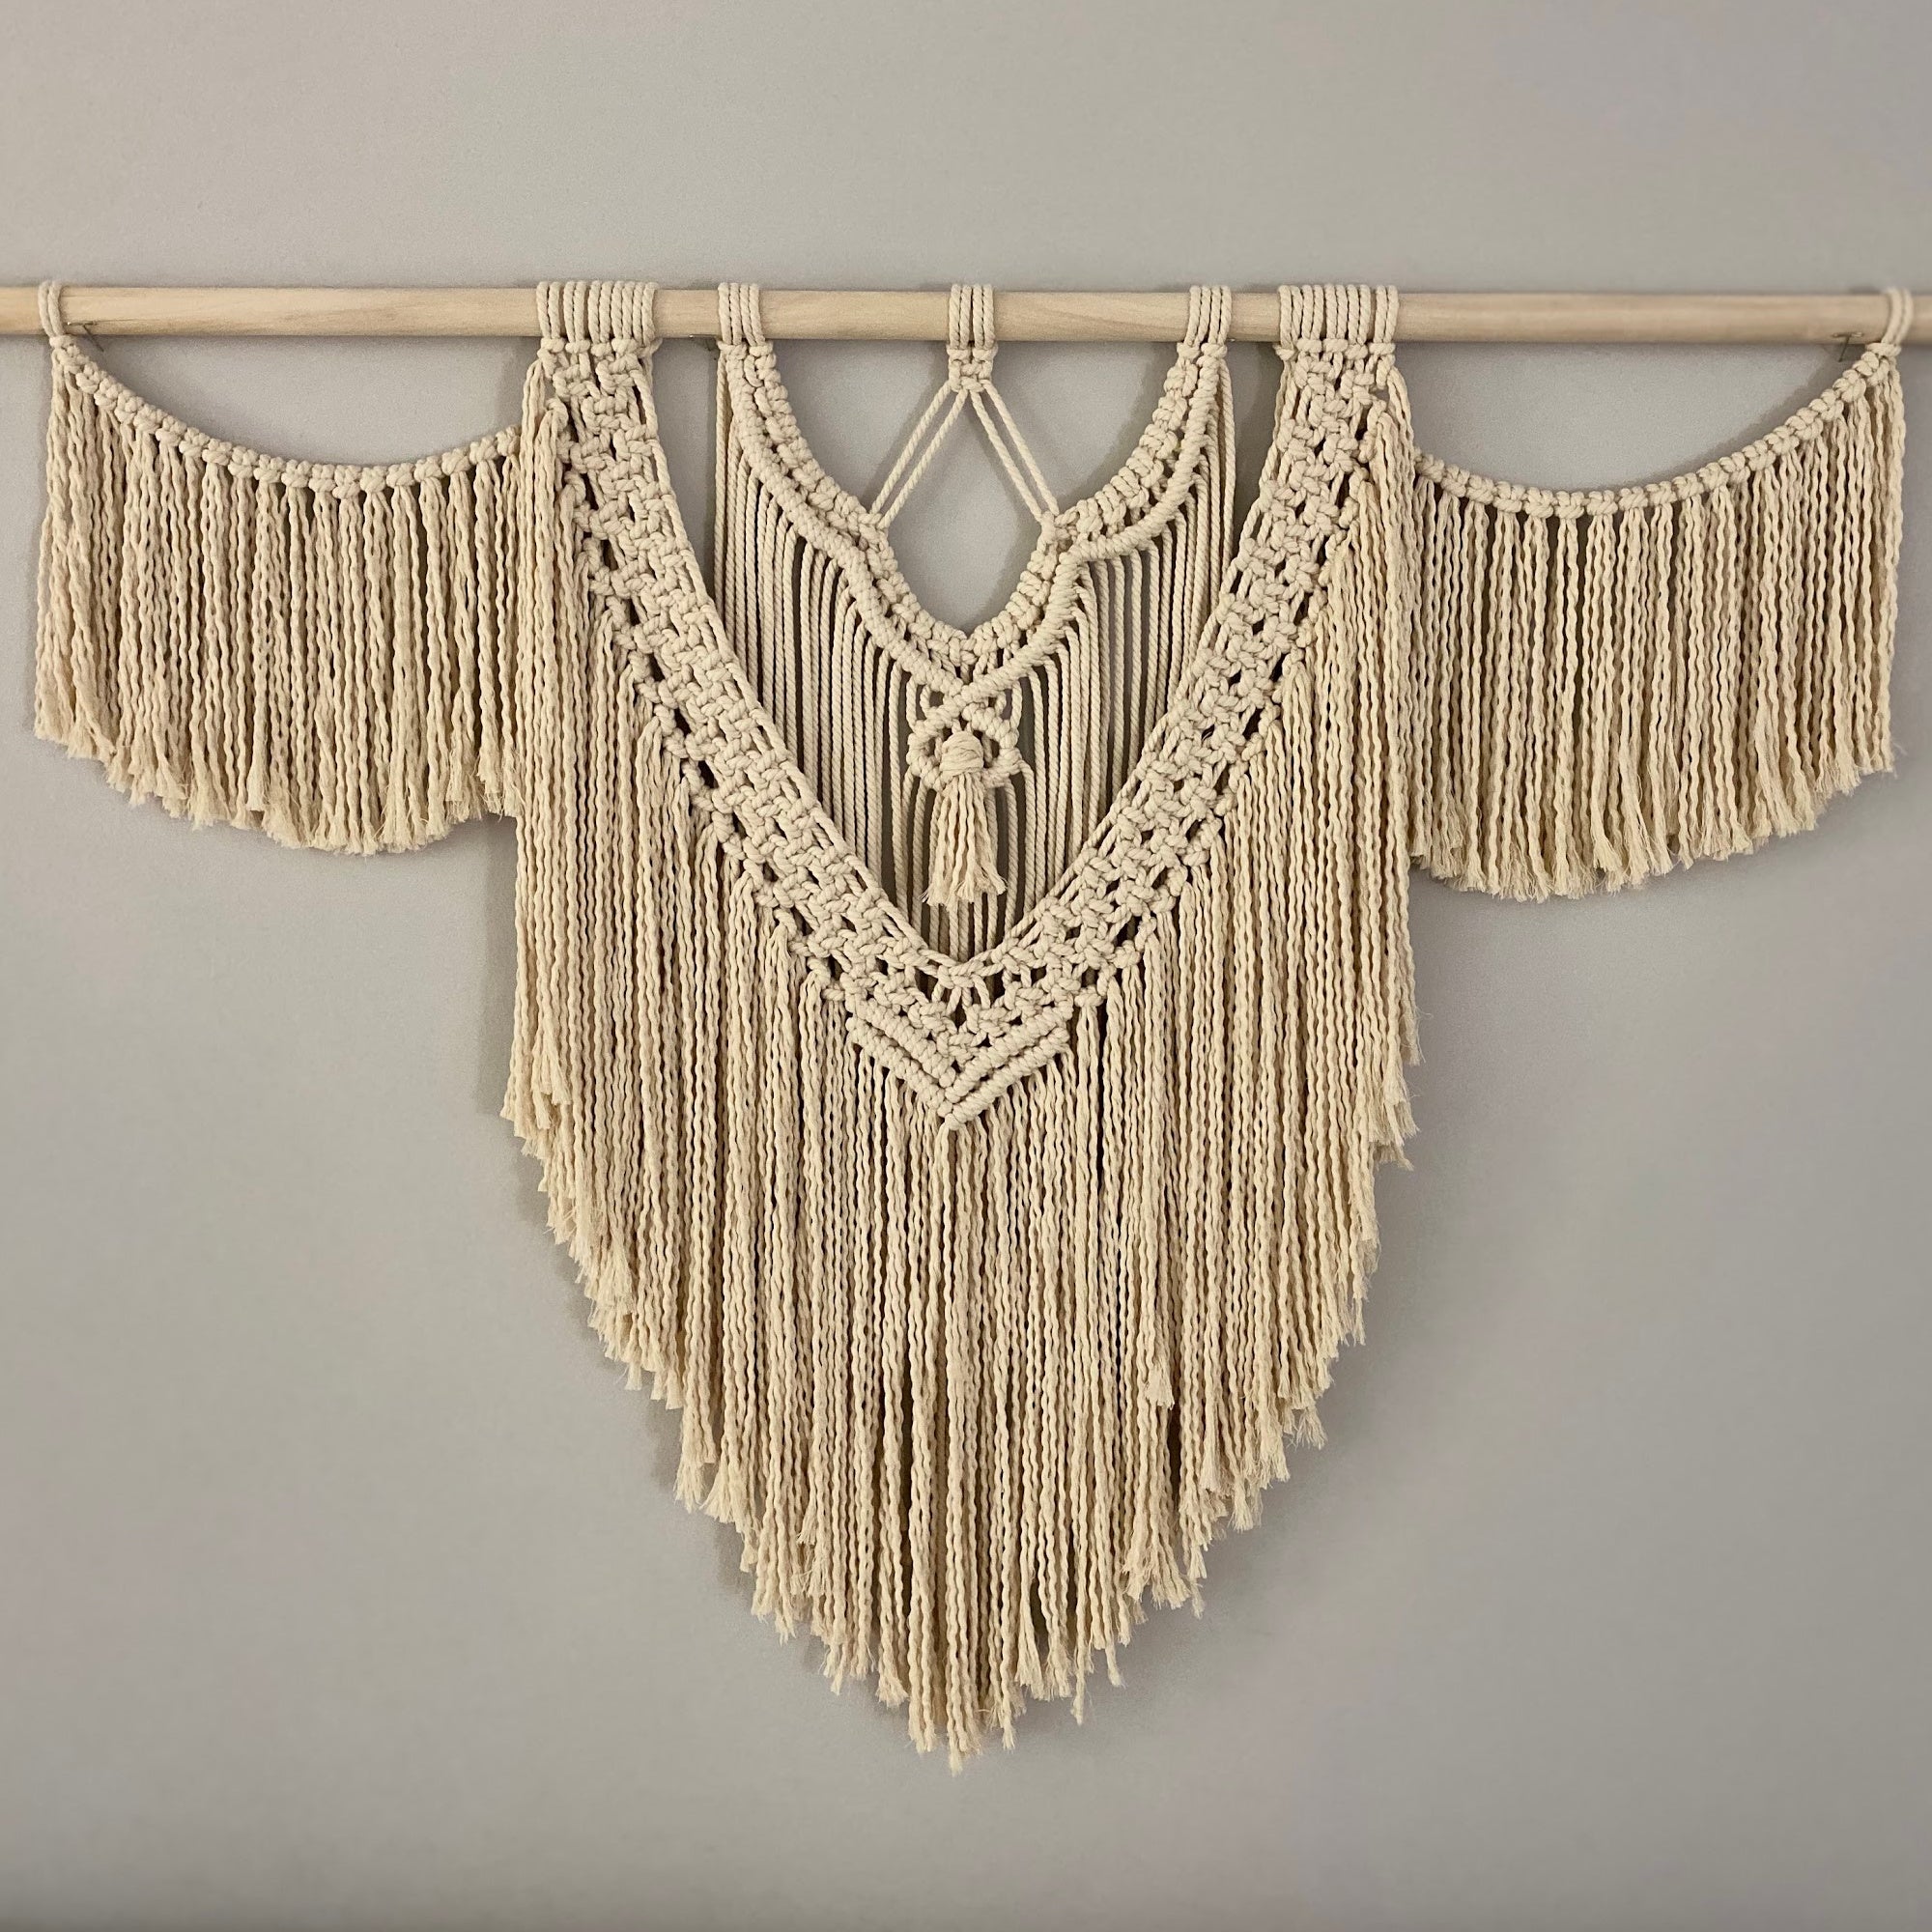 large macrame wall hanging against a light gray wall